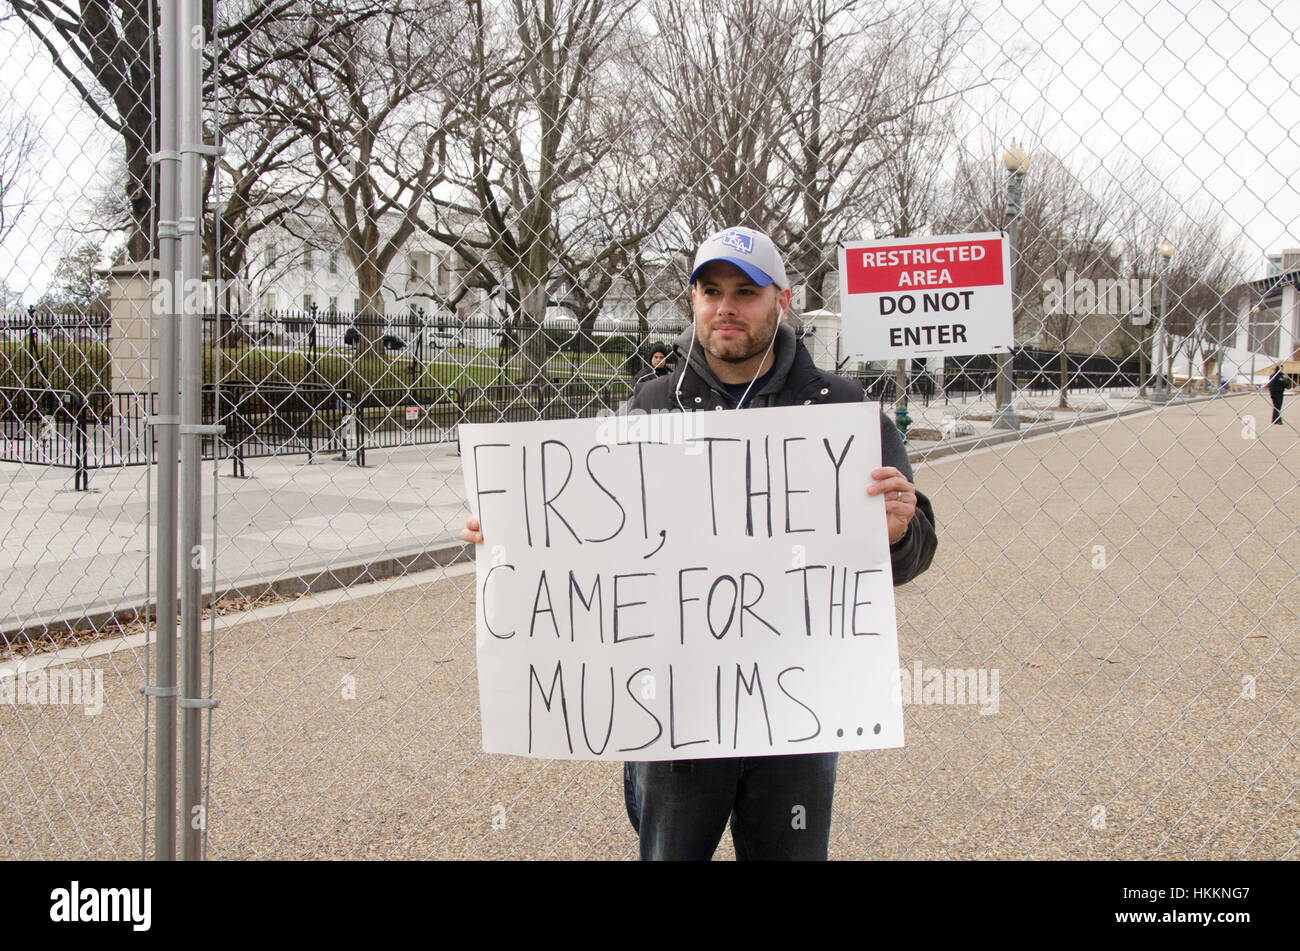 Washington, USA. 29th Jan, 2017. Protester holds sign that reads, 'First, they came for the Muslims' while standing before the White House during a protest opposing Donald Trump's immigration policies and refugee ban, in Washington D.C. Credit: Angela Drake/Alamy Live News Stock Photo